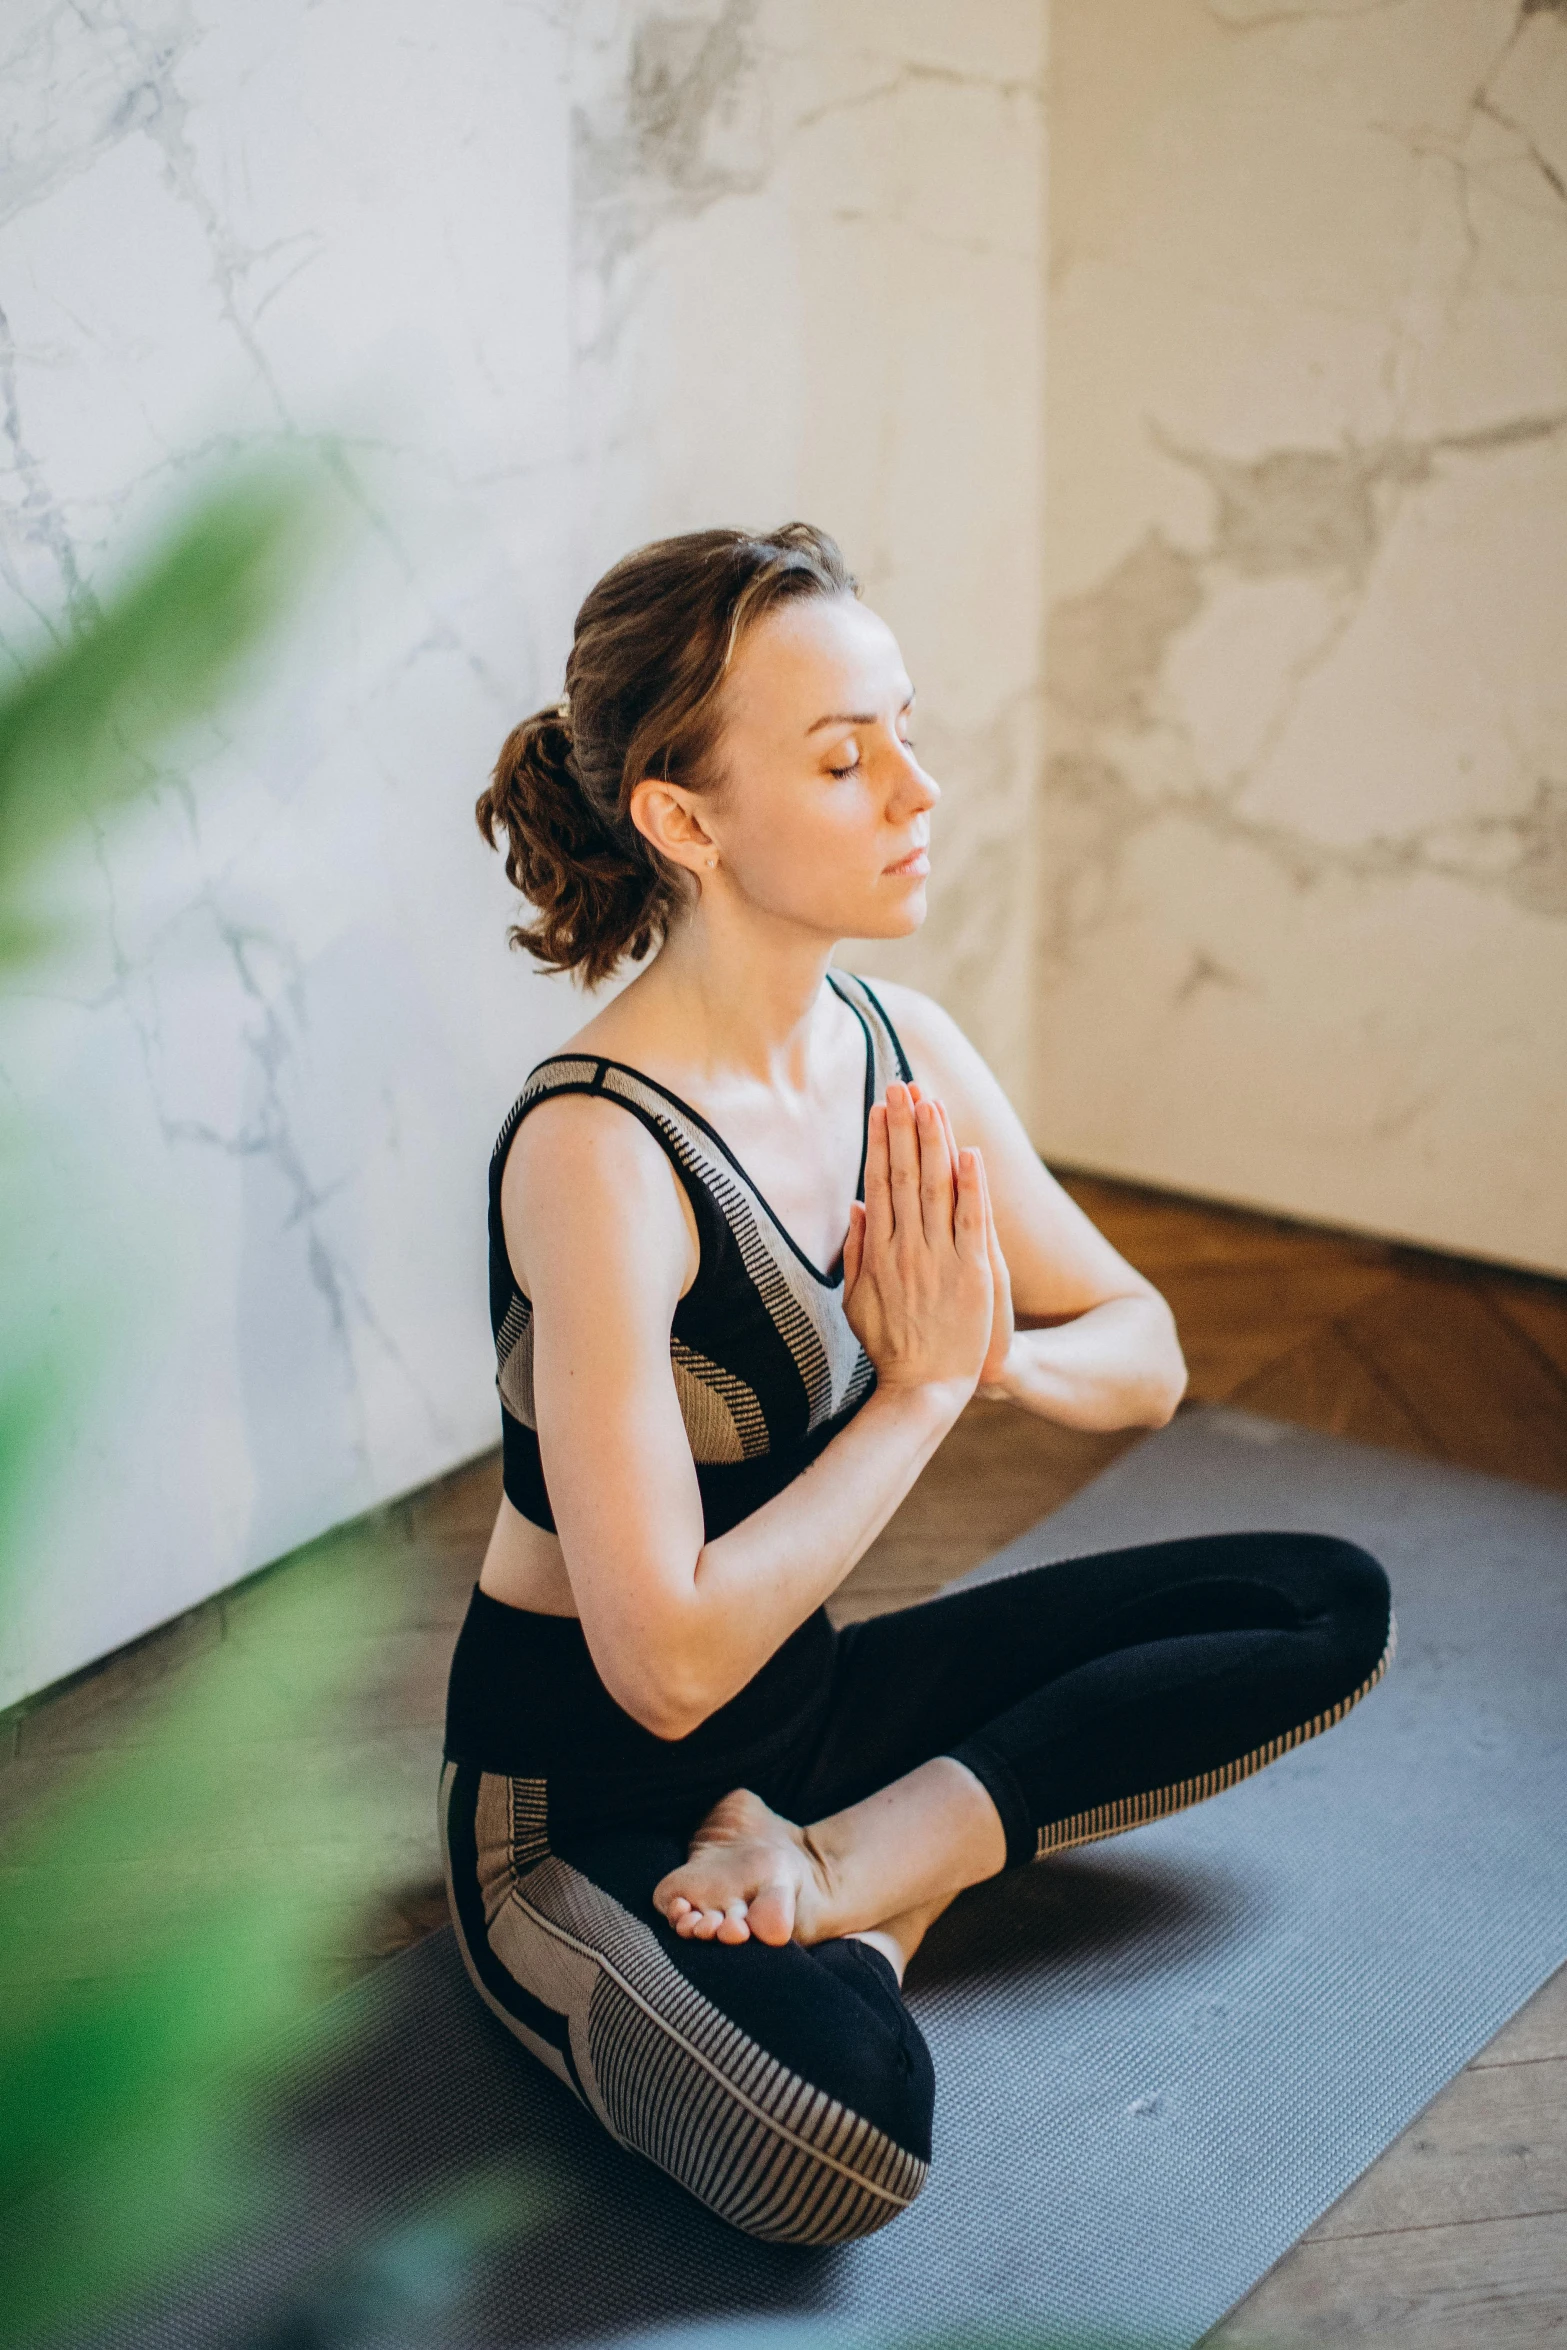 a woman sitting on a yoga mat in the middle of a room, praying posture, promo image, ewa juszkiewicz, low quality photo